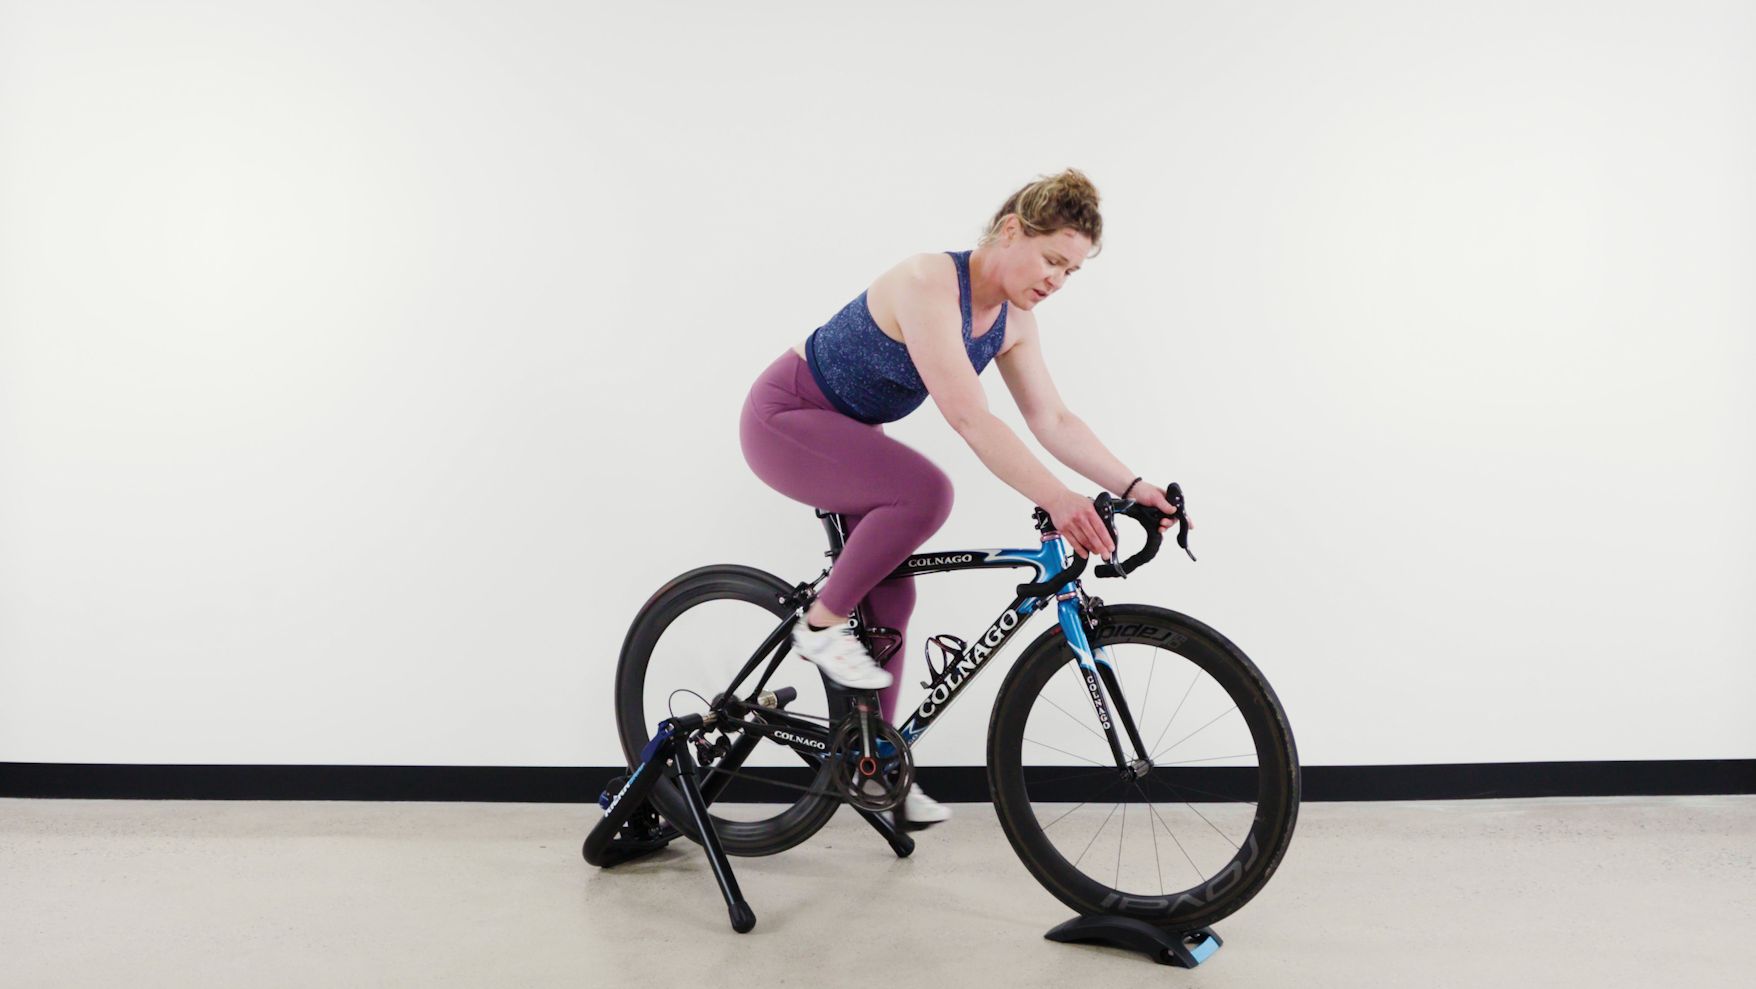 Cycling Pedal Power: How to Make Pedaling More Efficient